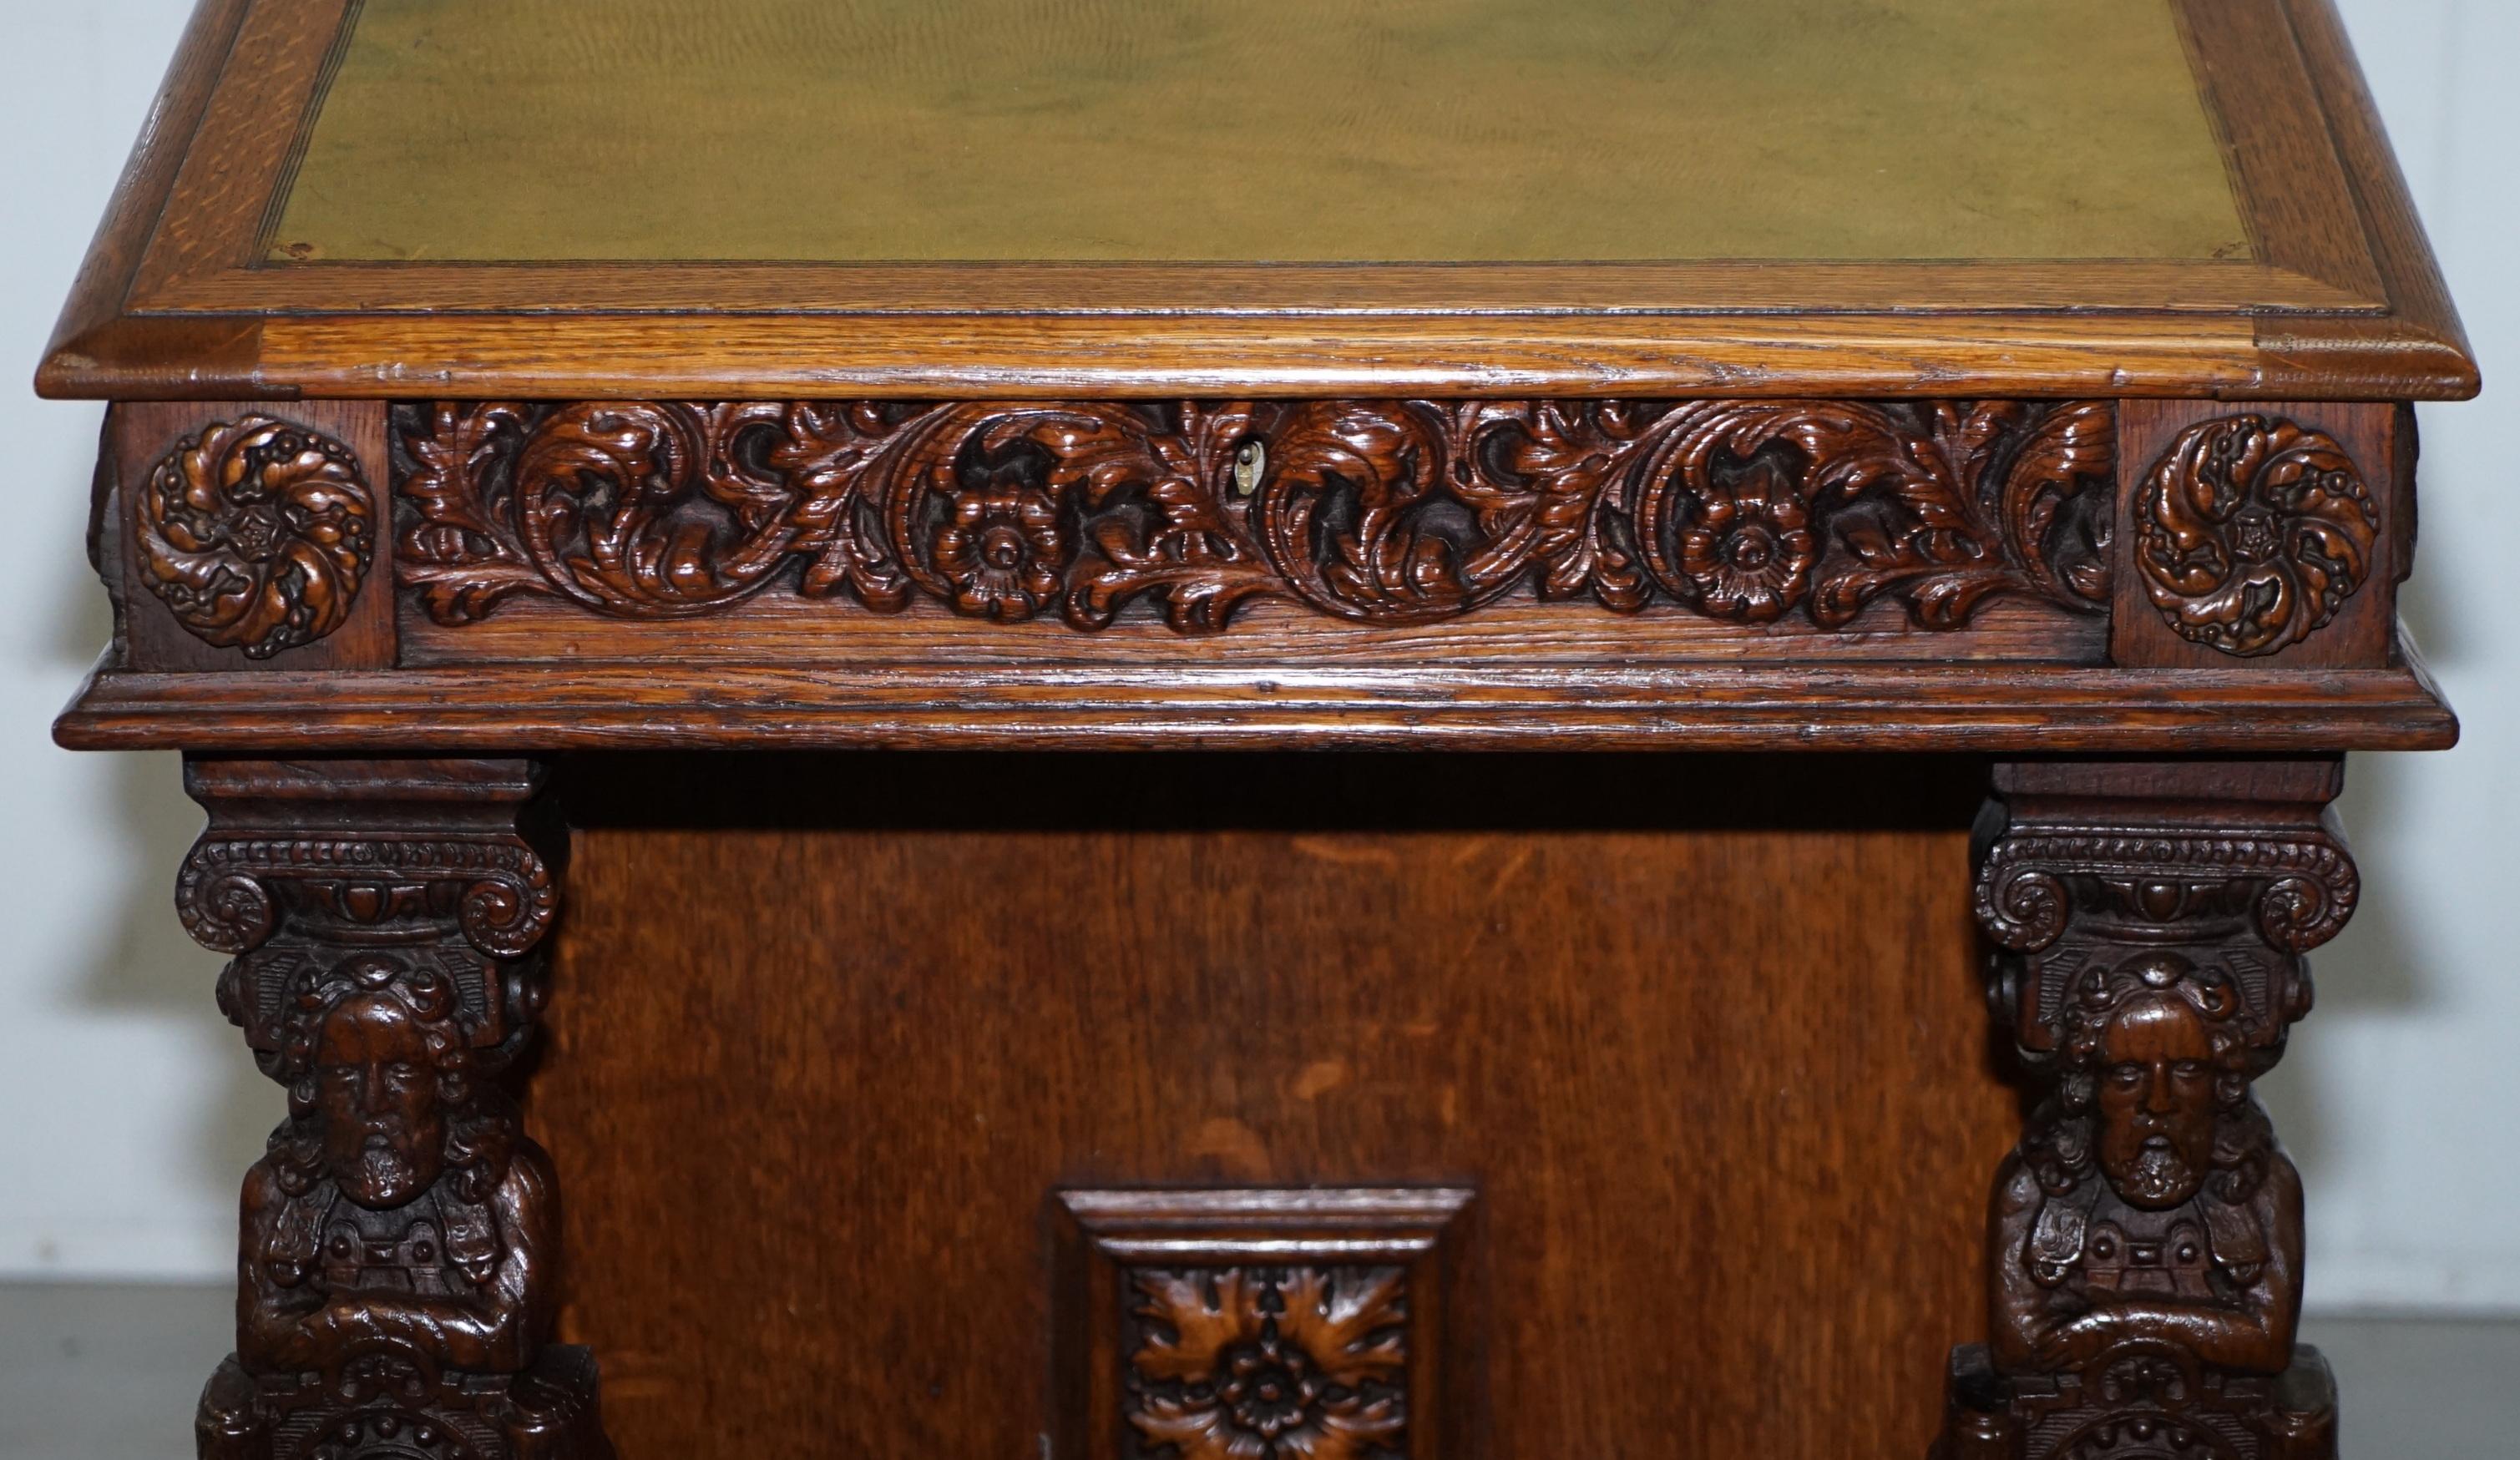 English Stunning Hand Carved Early Victorian circa 1840 Davenport Writing Desk Drawers